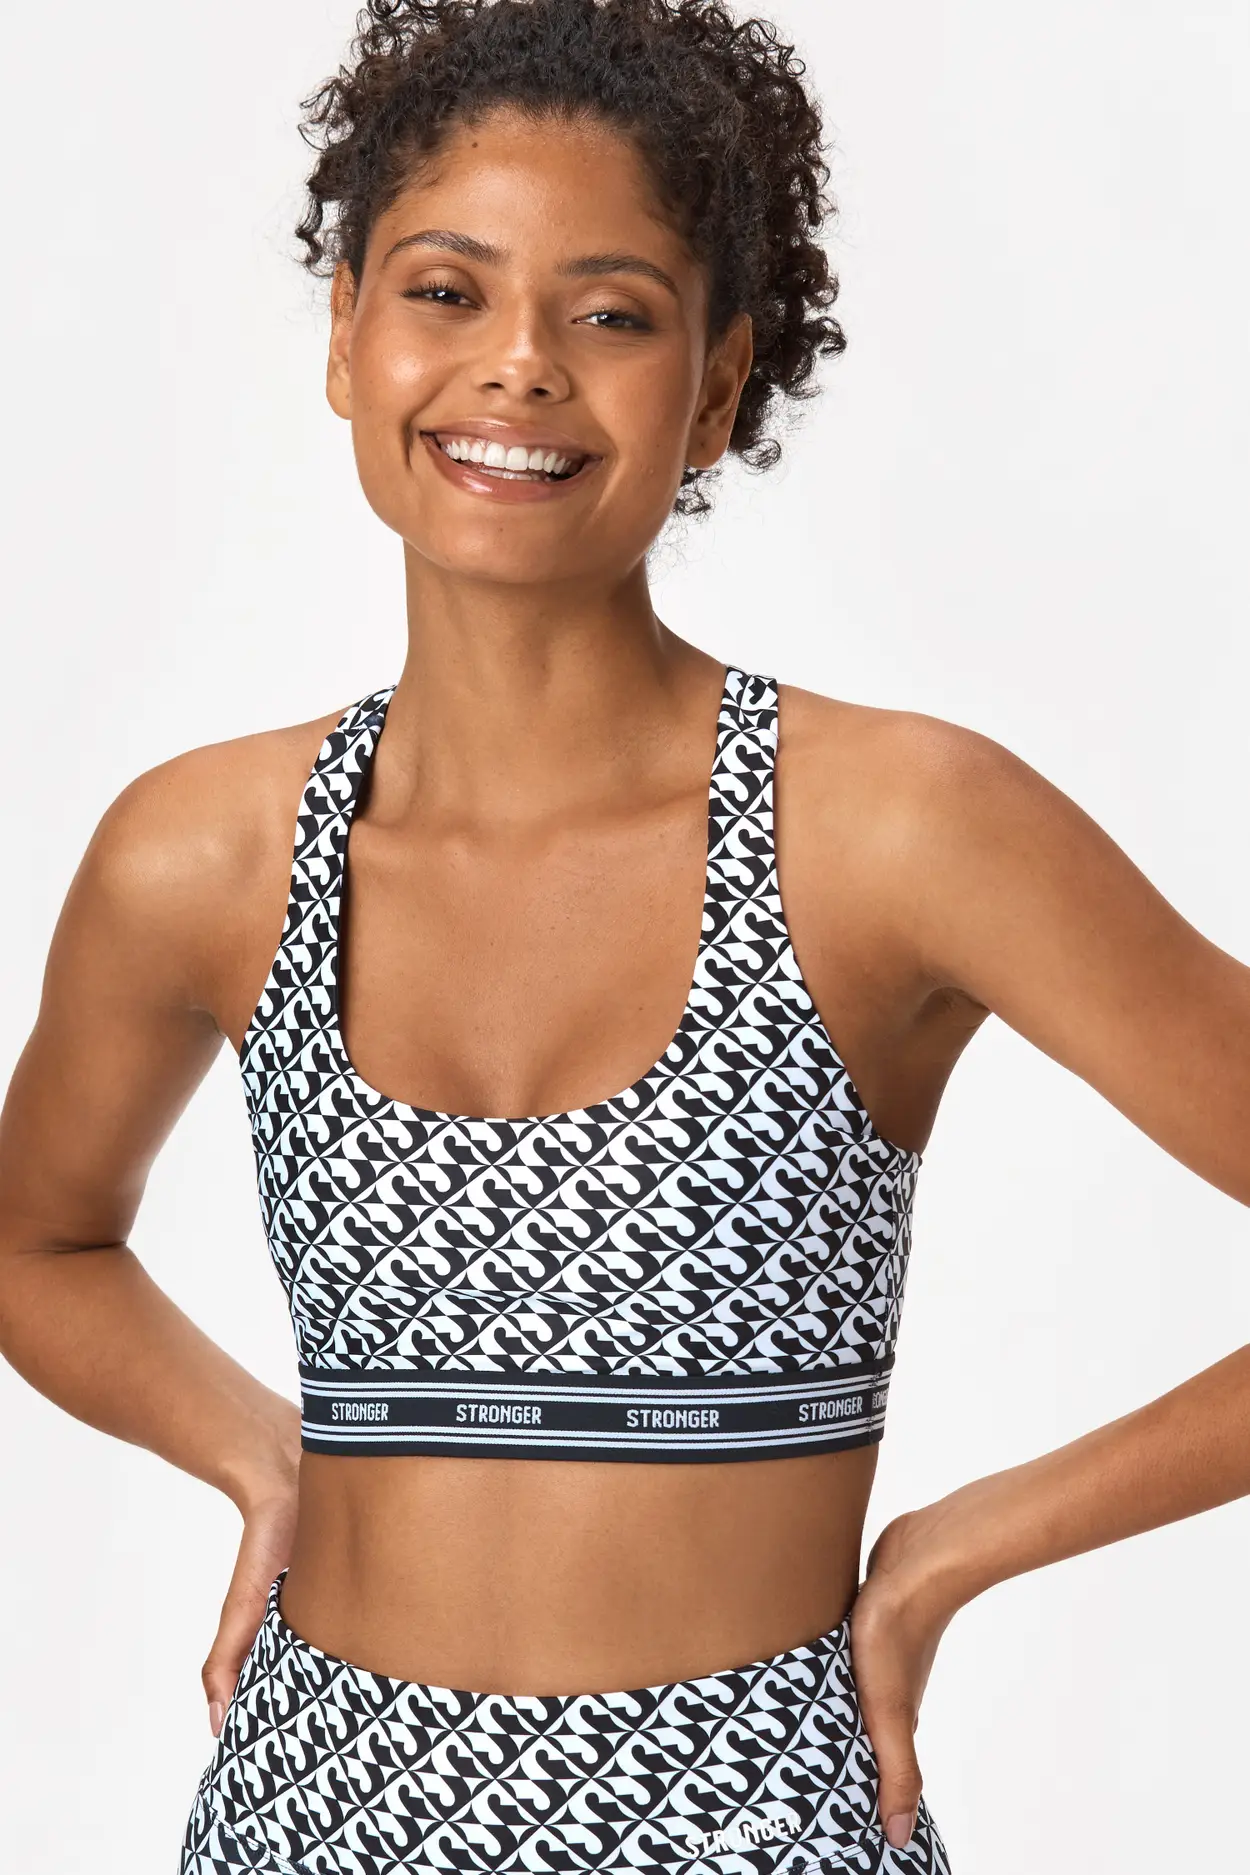 All In Motion Soft Strappy Black Sports Bra Size M - $8 (50% Off Retail) -  From Jan